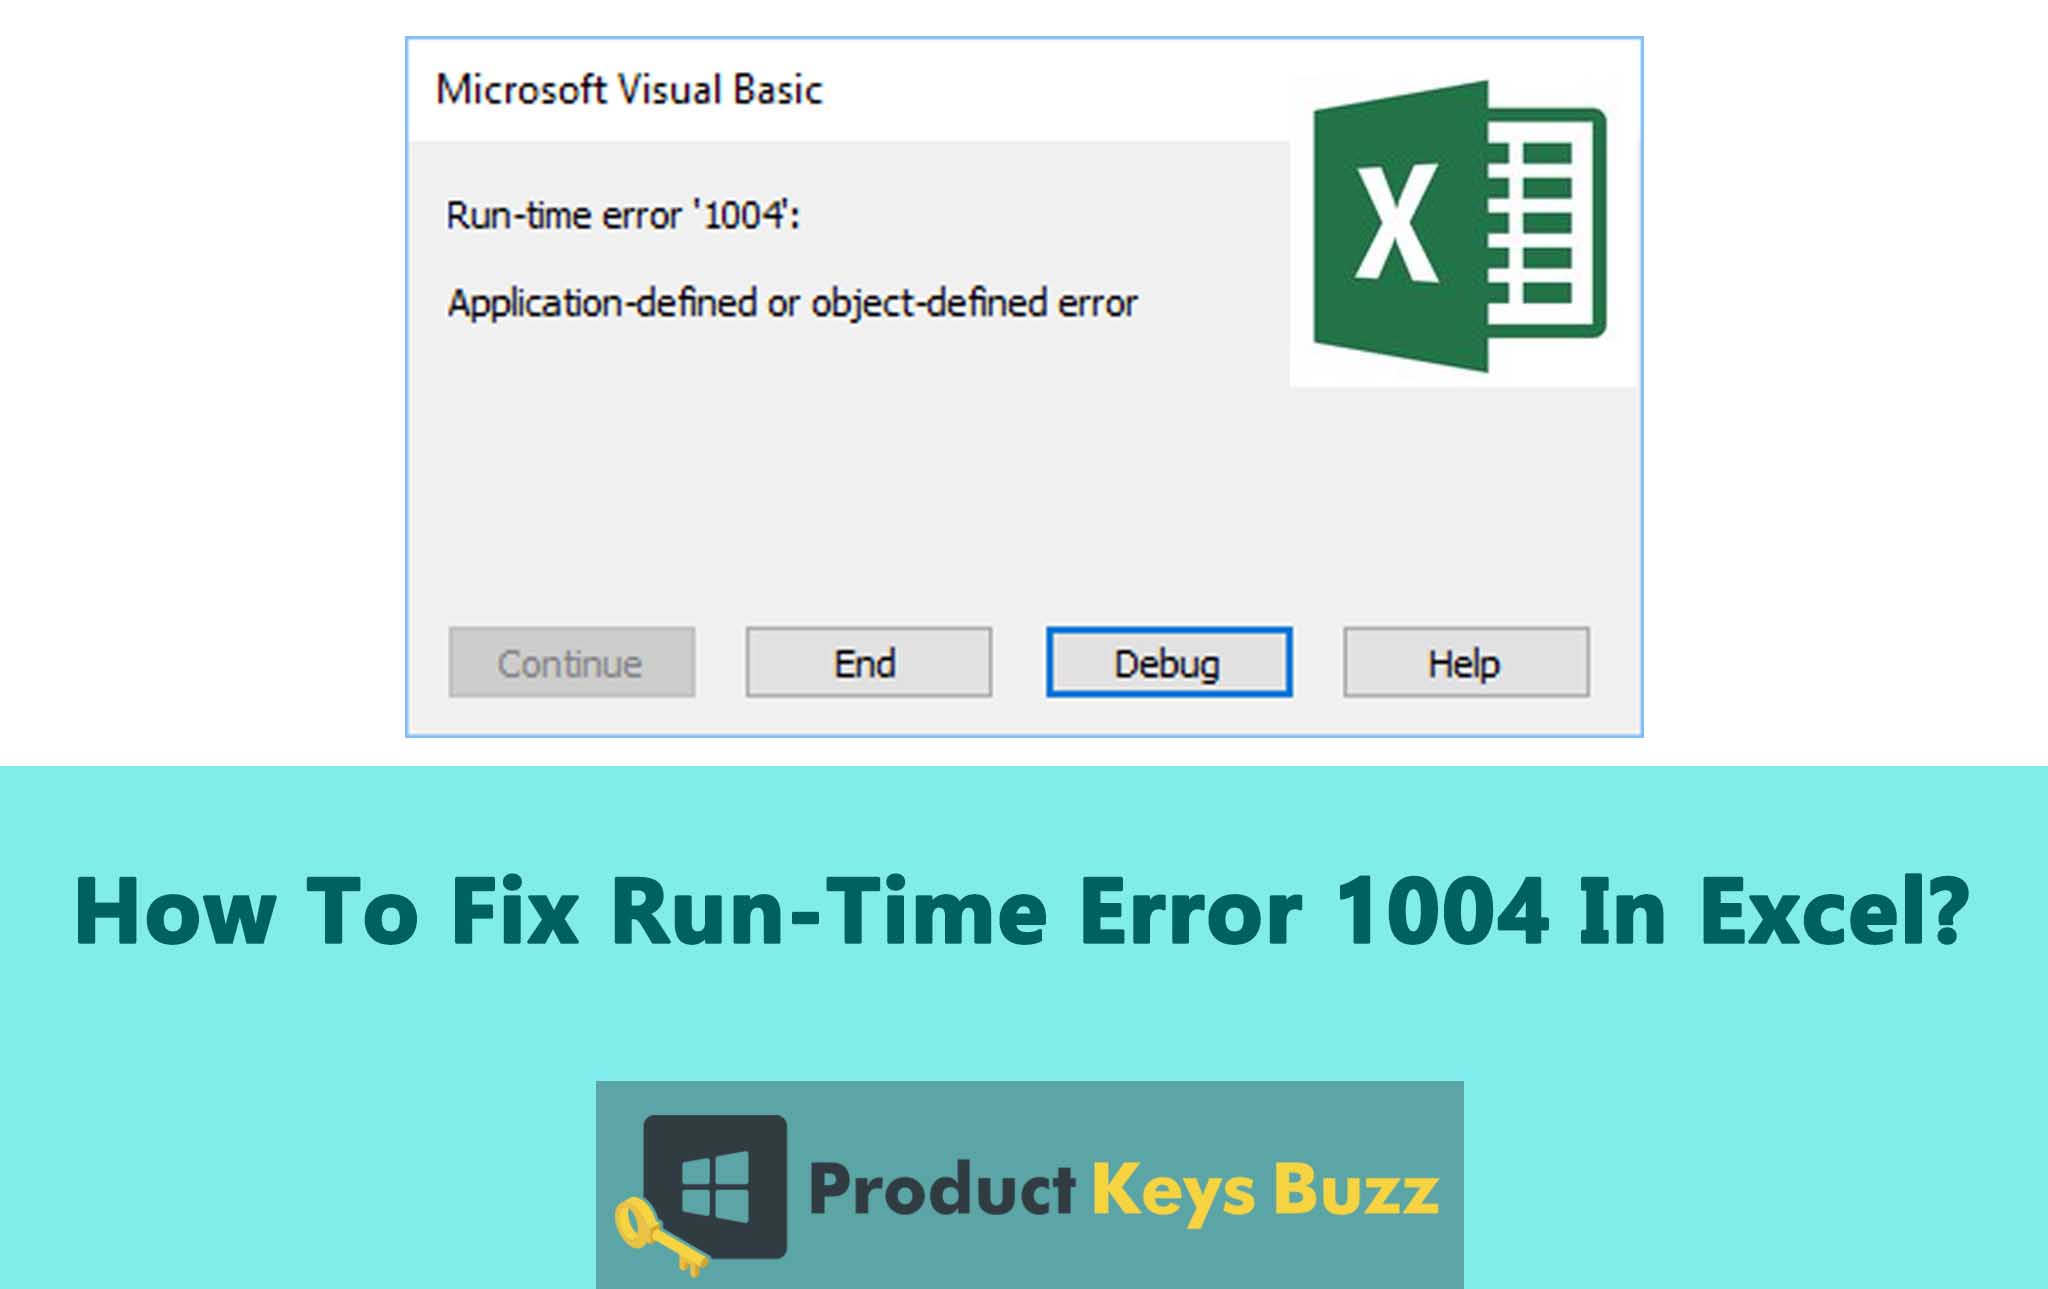 How To Fix Run-Time Error 1004 In Excel